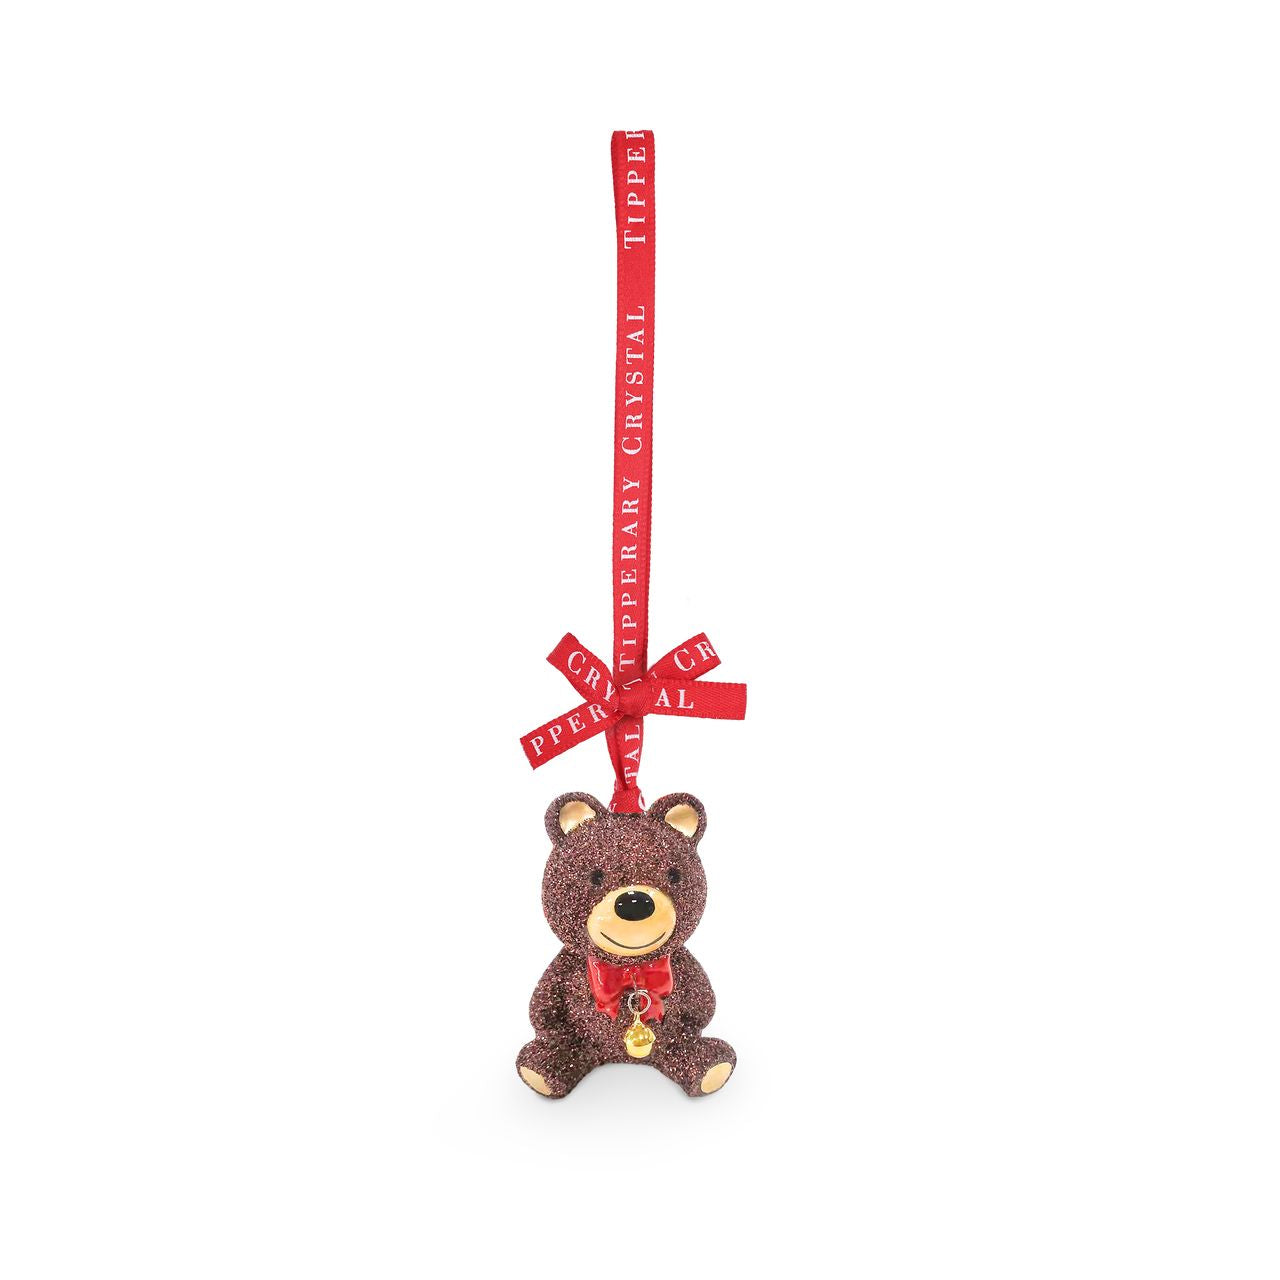 Porcelain Decoration - Teddy Bear Christmas Ornament - NEW 2022  We just Love Christmas! The festive season, the giving of gifts, creating memories and being together with family and loved ones. Have lots of fun with our lovingly designed and created Christmas decorations, each one has a magic sparkle of elf dust!